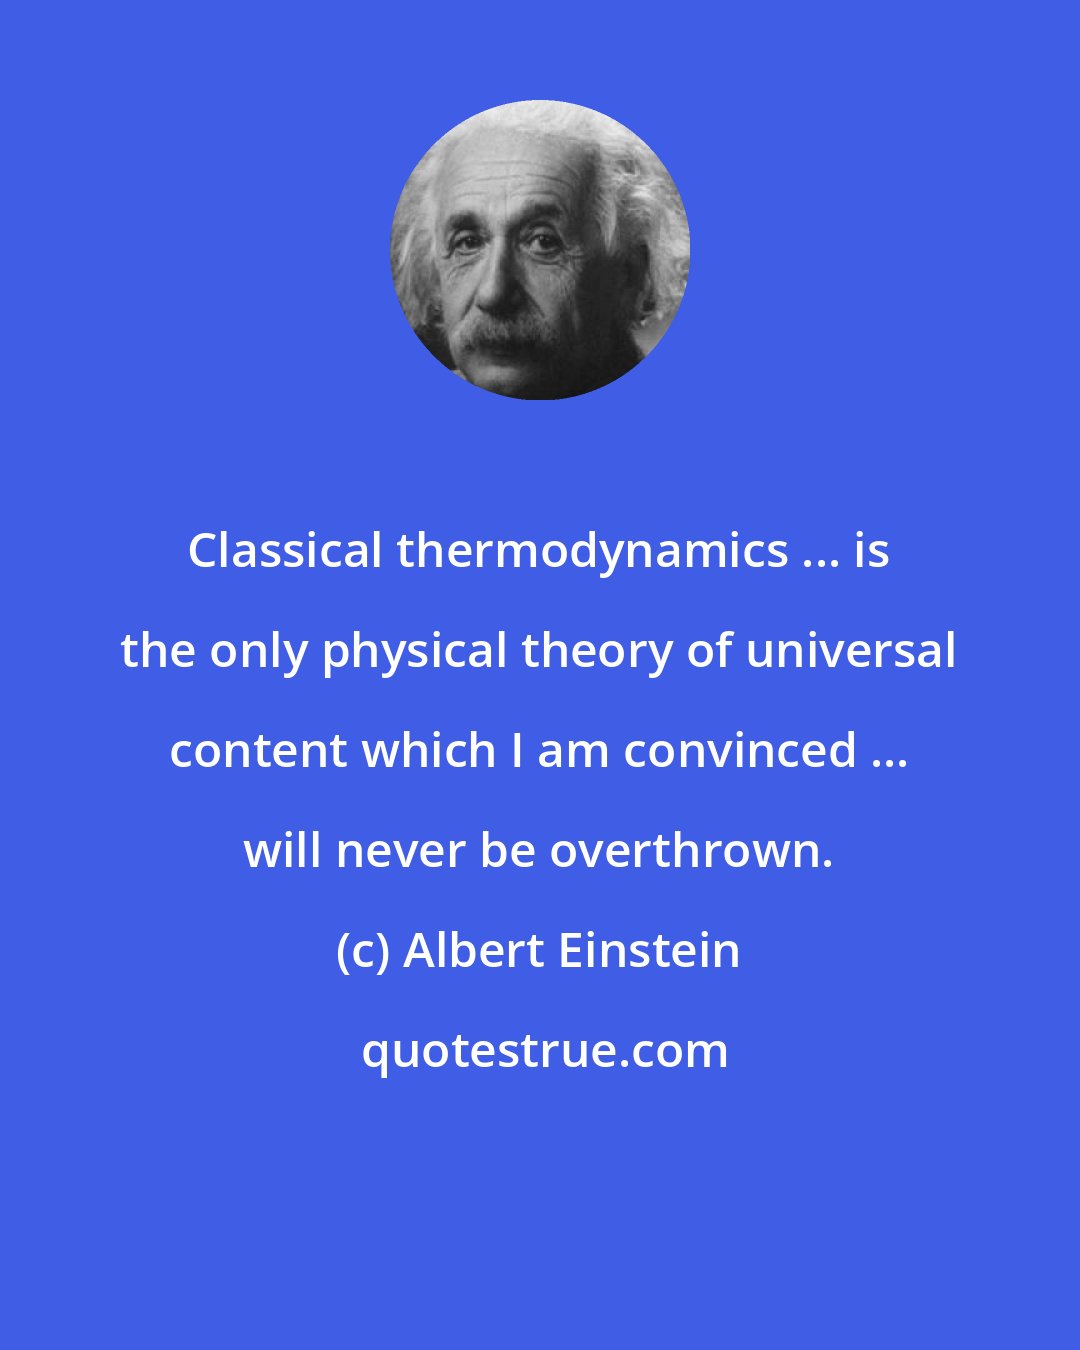 Albert Einstein: Classical thermodynamics ... is the only physical theory of universal content which I am convinced ... will never be overthrown.